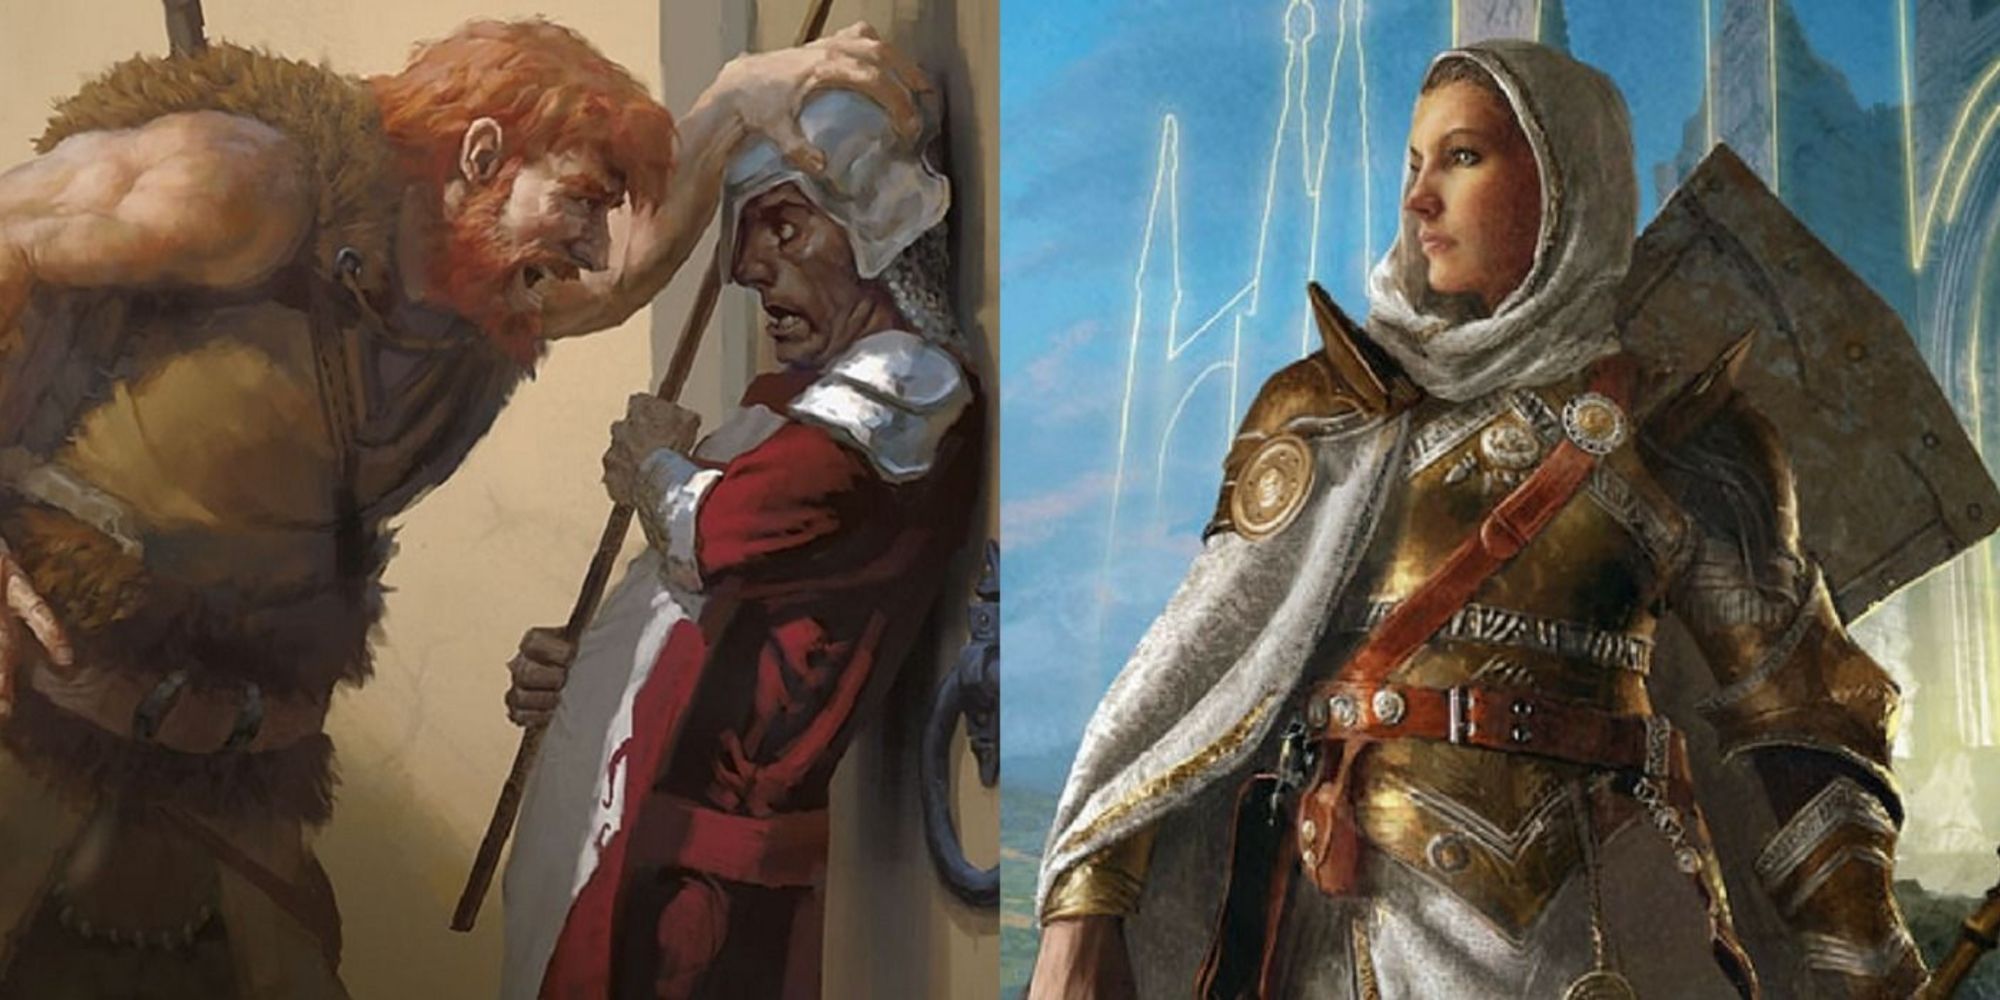 Split images of D&D art showing a Barbarian threatening a knight and a female Barbarian. 